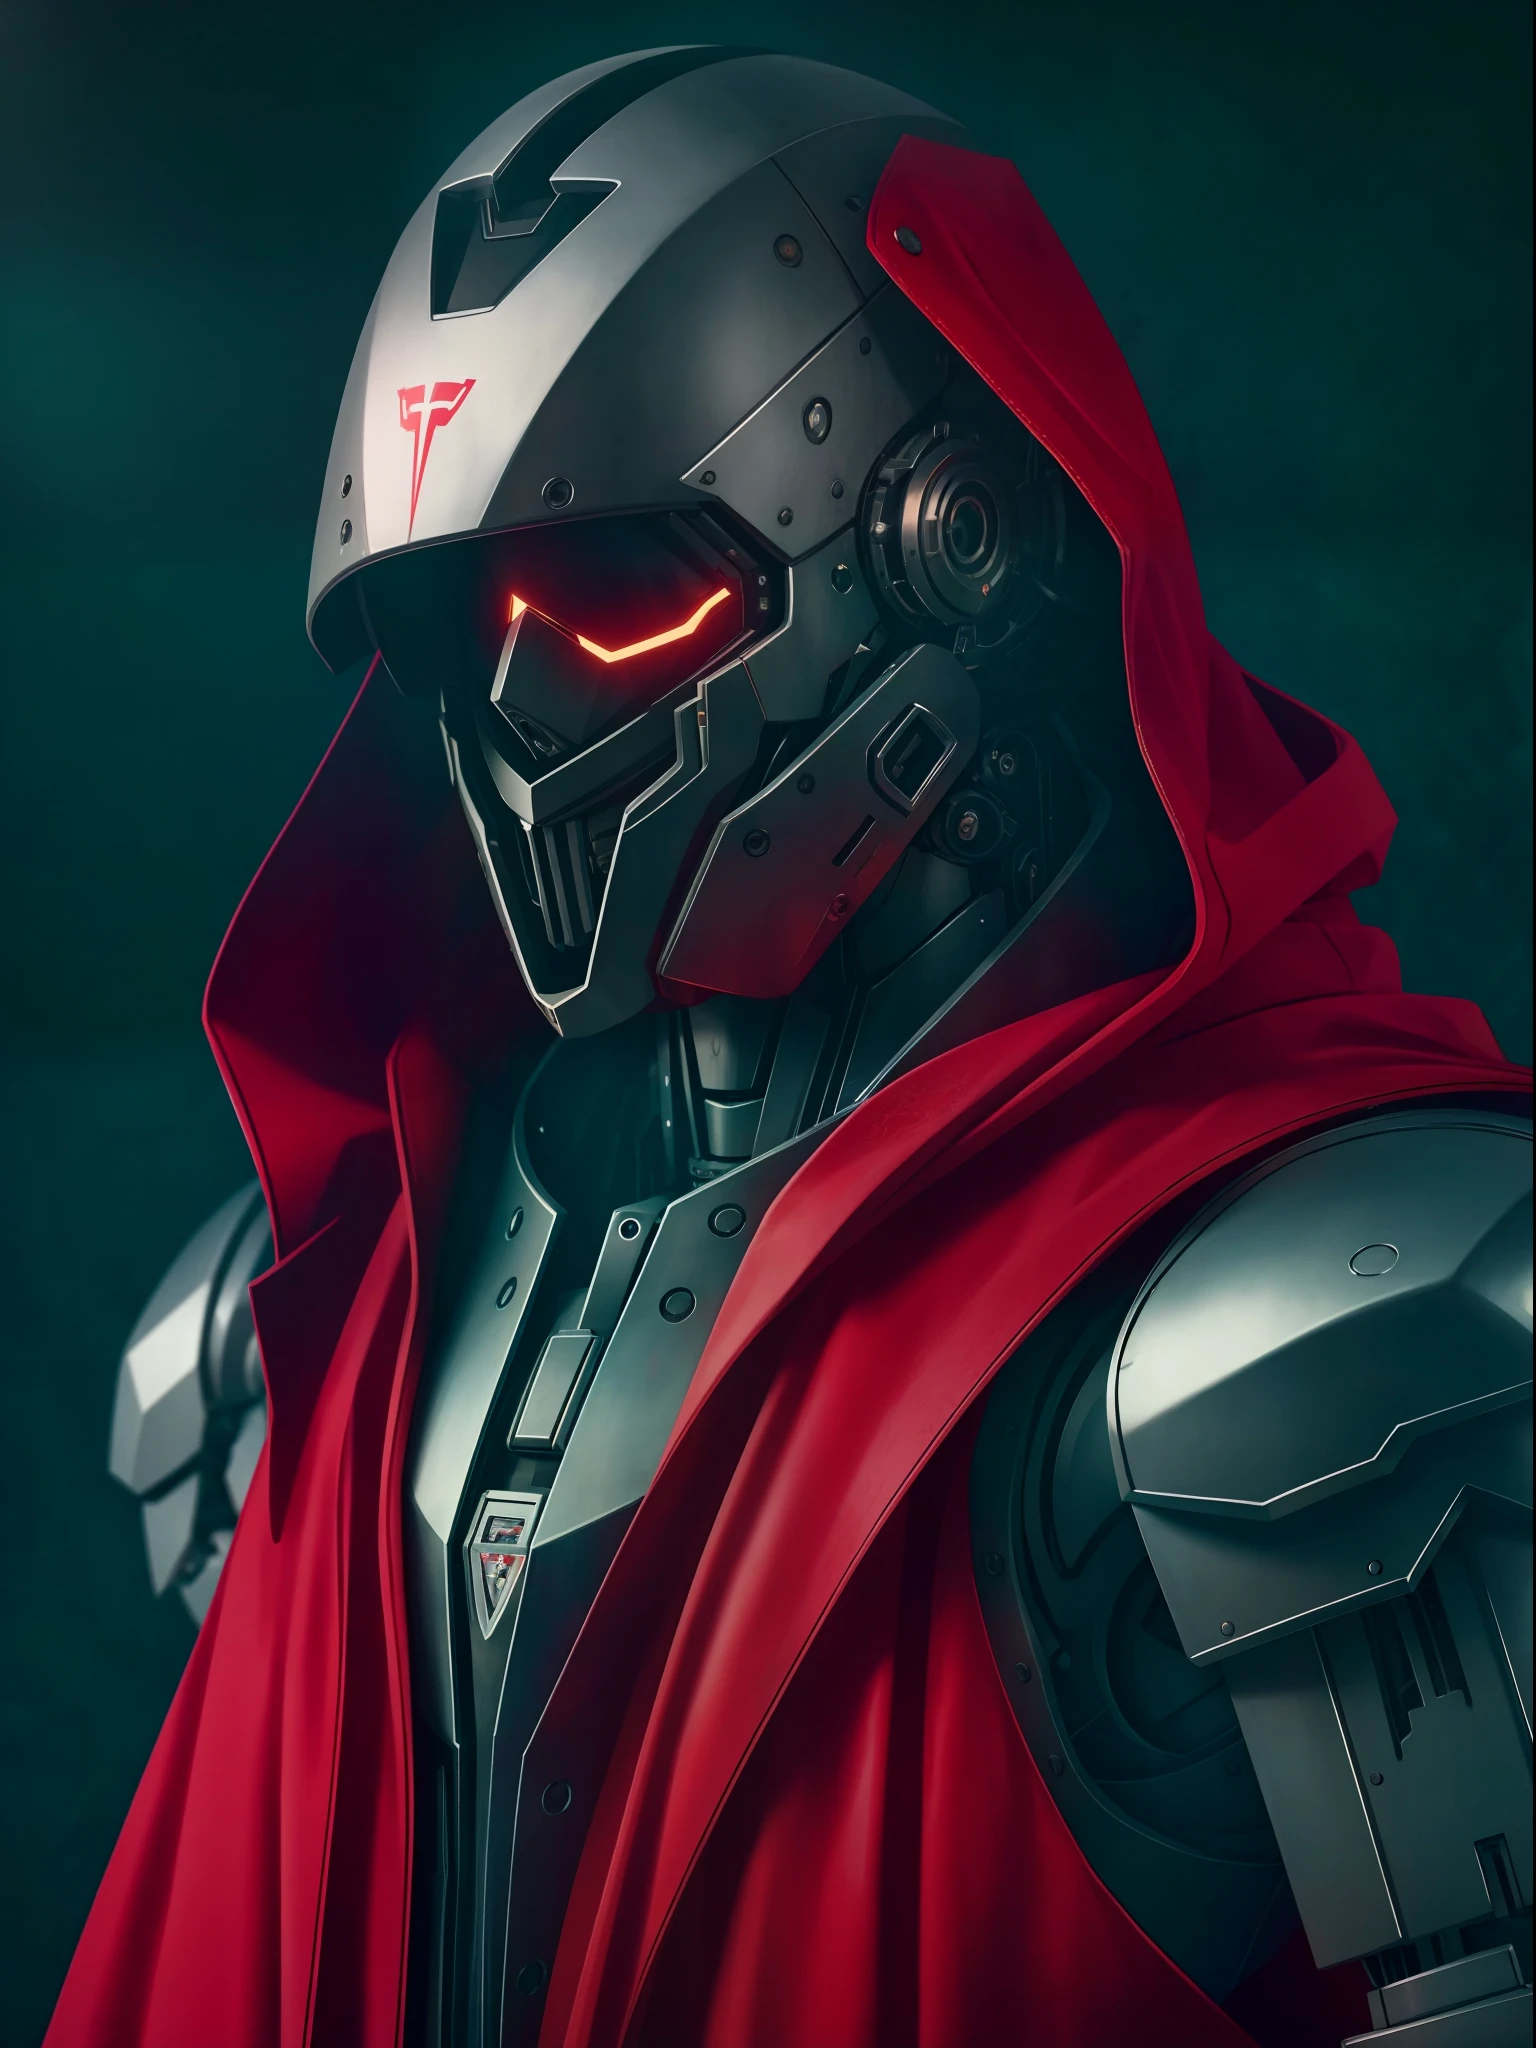 (Masterpiece, Best Quality), Intricate Details, Photos, Realism, Unreal Engine, Robot Portrait in Red Cloak Closeup, Male Robot, Mecha, Humanoid Robot, Robot Joint, Joint, Helmet, Armor, Robot, Rust, Abandoned Warehouse, Computer Terminal, Arc, Dark Atmosphere, Tesla Coil, Plasma, Perfect Proportions, Octane Render, Two-tone Lighting, Large Aperture, Low ISO, White Balance, Rule of Thirds, 8K RAW, High Efficiency Sub-Pixel, subpixel convolution,